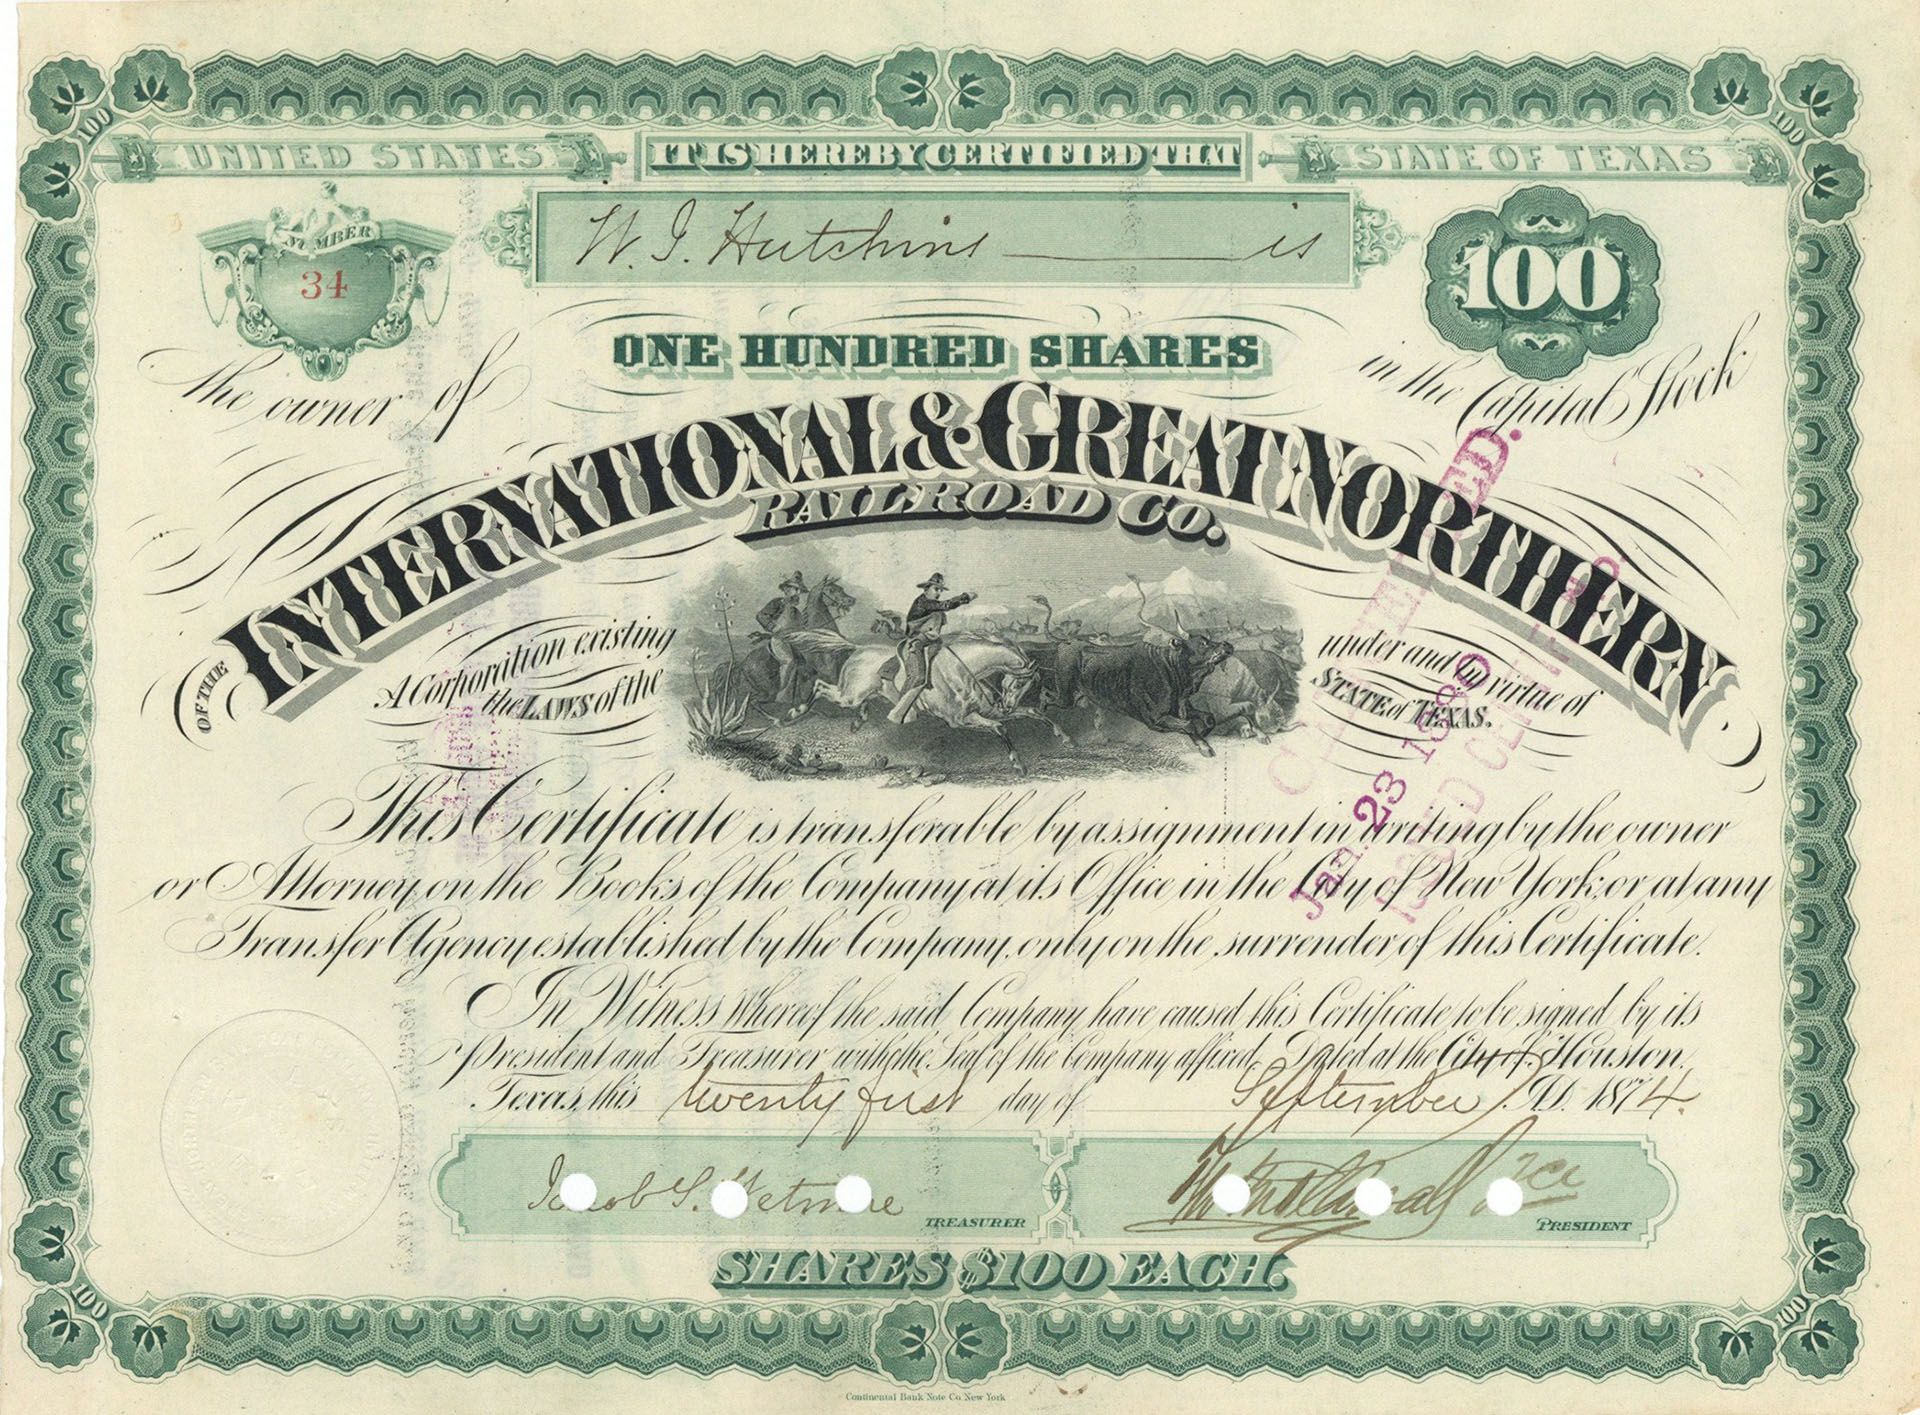 International and Great Northern Railroad Co. - Stock Certificate